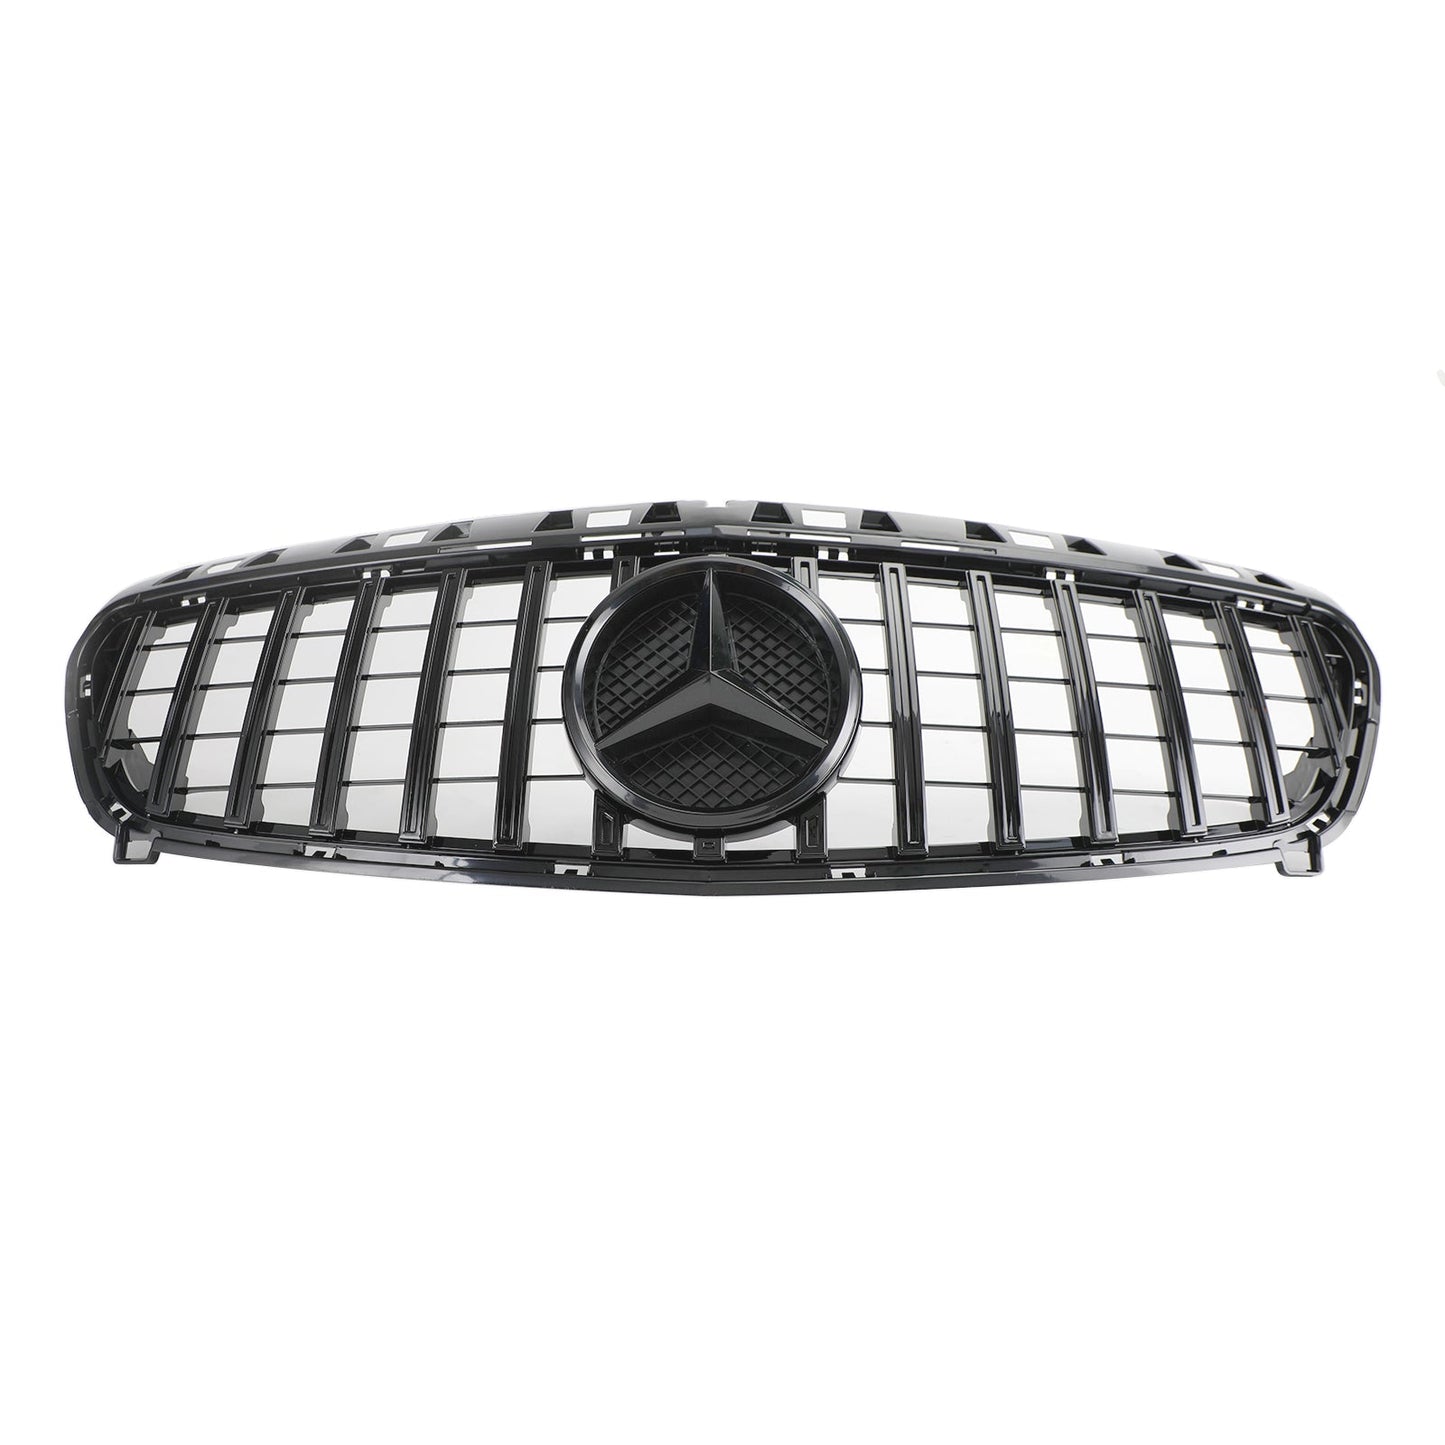 2013-2015 Mercedes Benz Grill A CLASS W176 Car grille Gloss Black Front Bumper Grille Grill